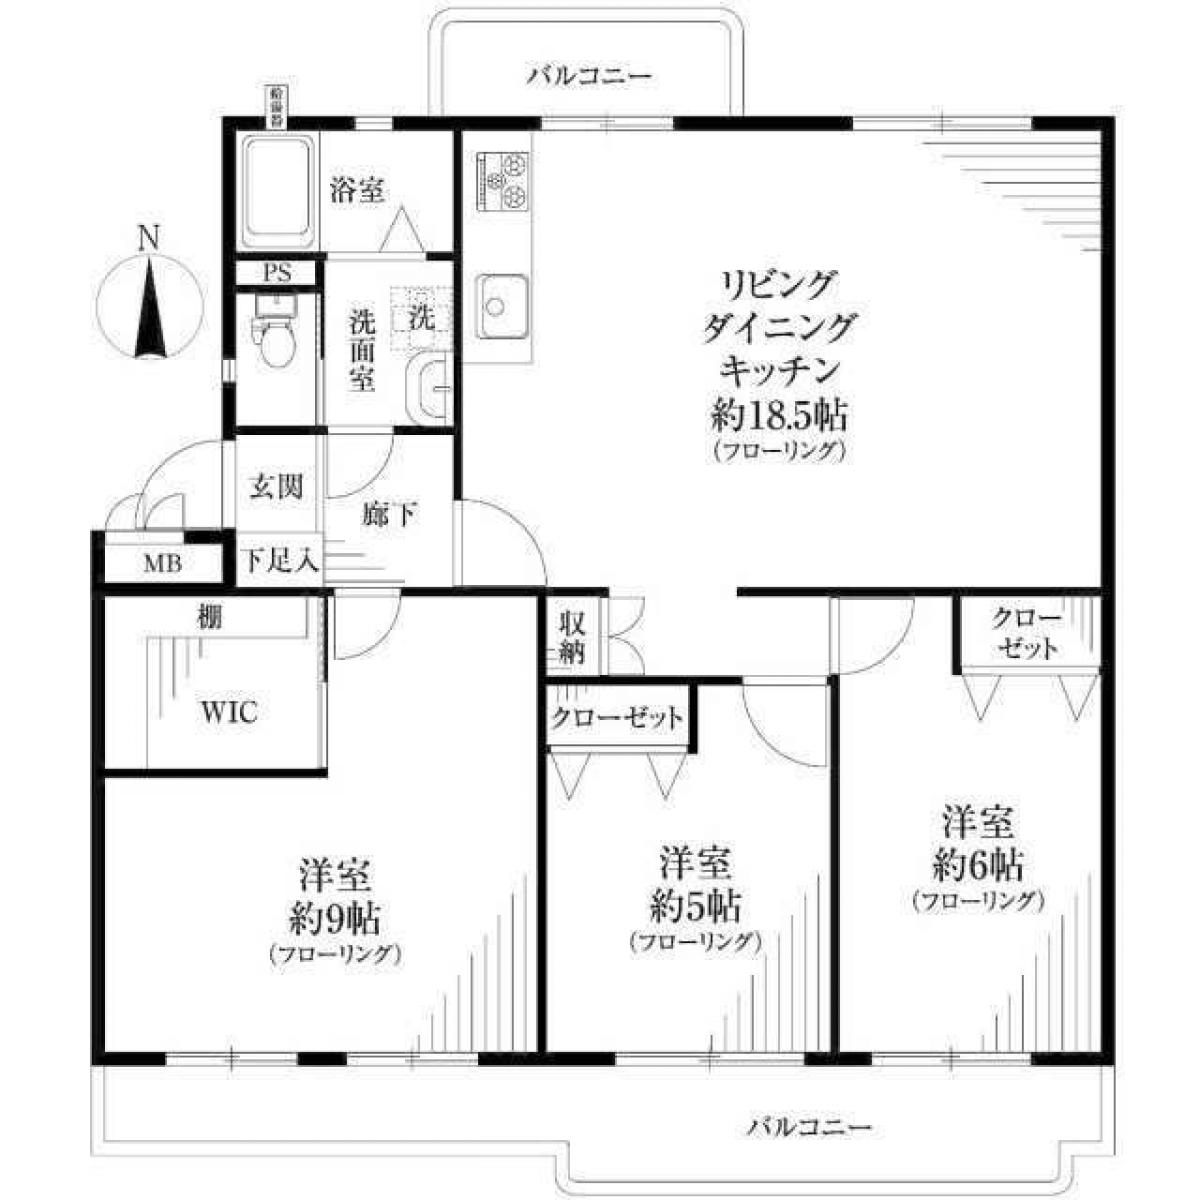 Picture of Apartment For Sale in Nagareyama Shi, Chiba, Japan